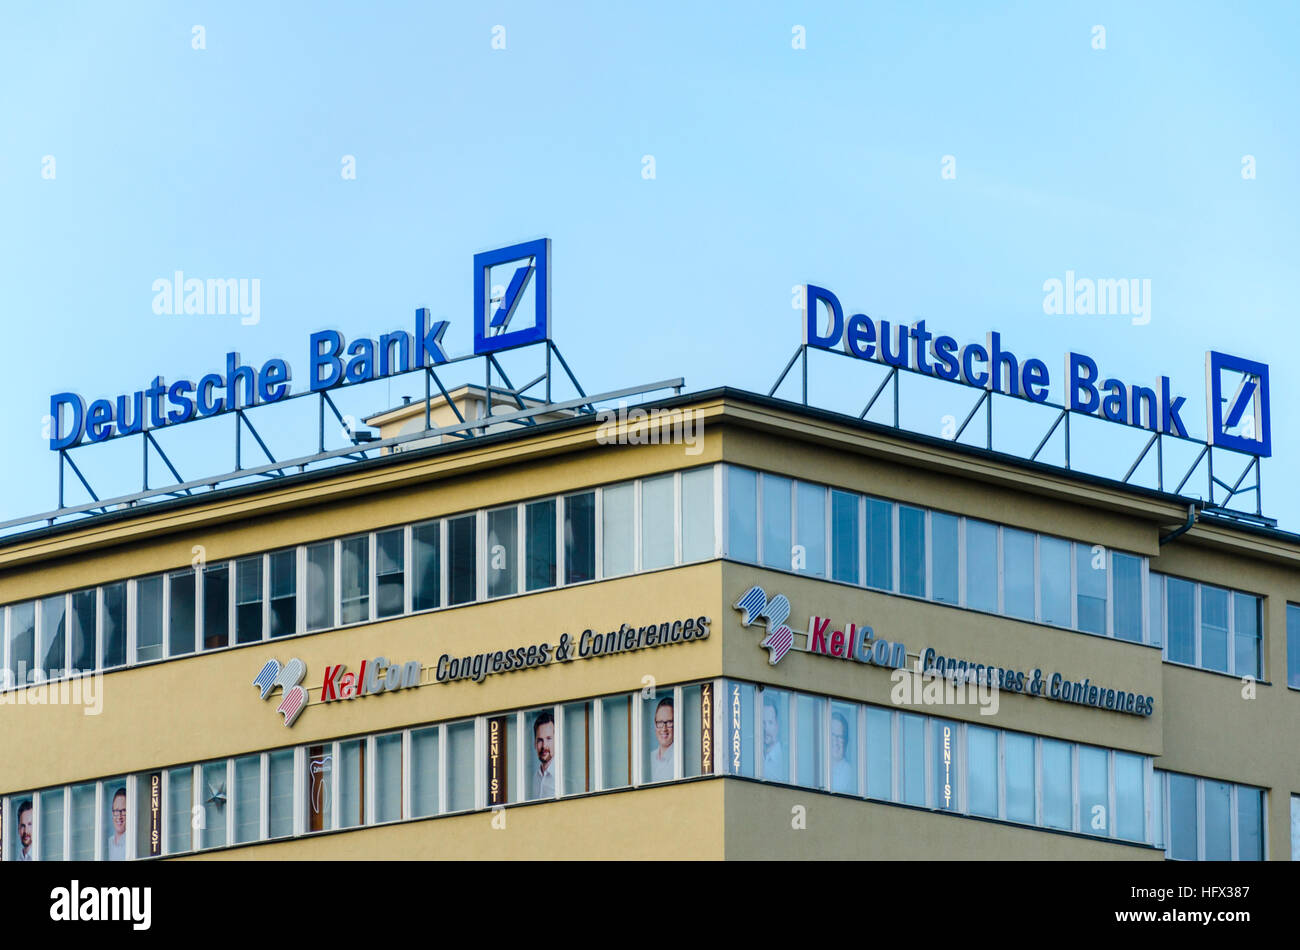 Deutsche Bank logo sign on top of a building on Tauentzienstrasse, Berlin, Germany Stock Photo